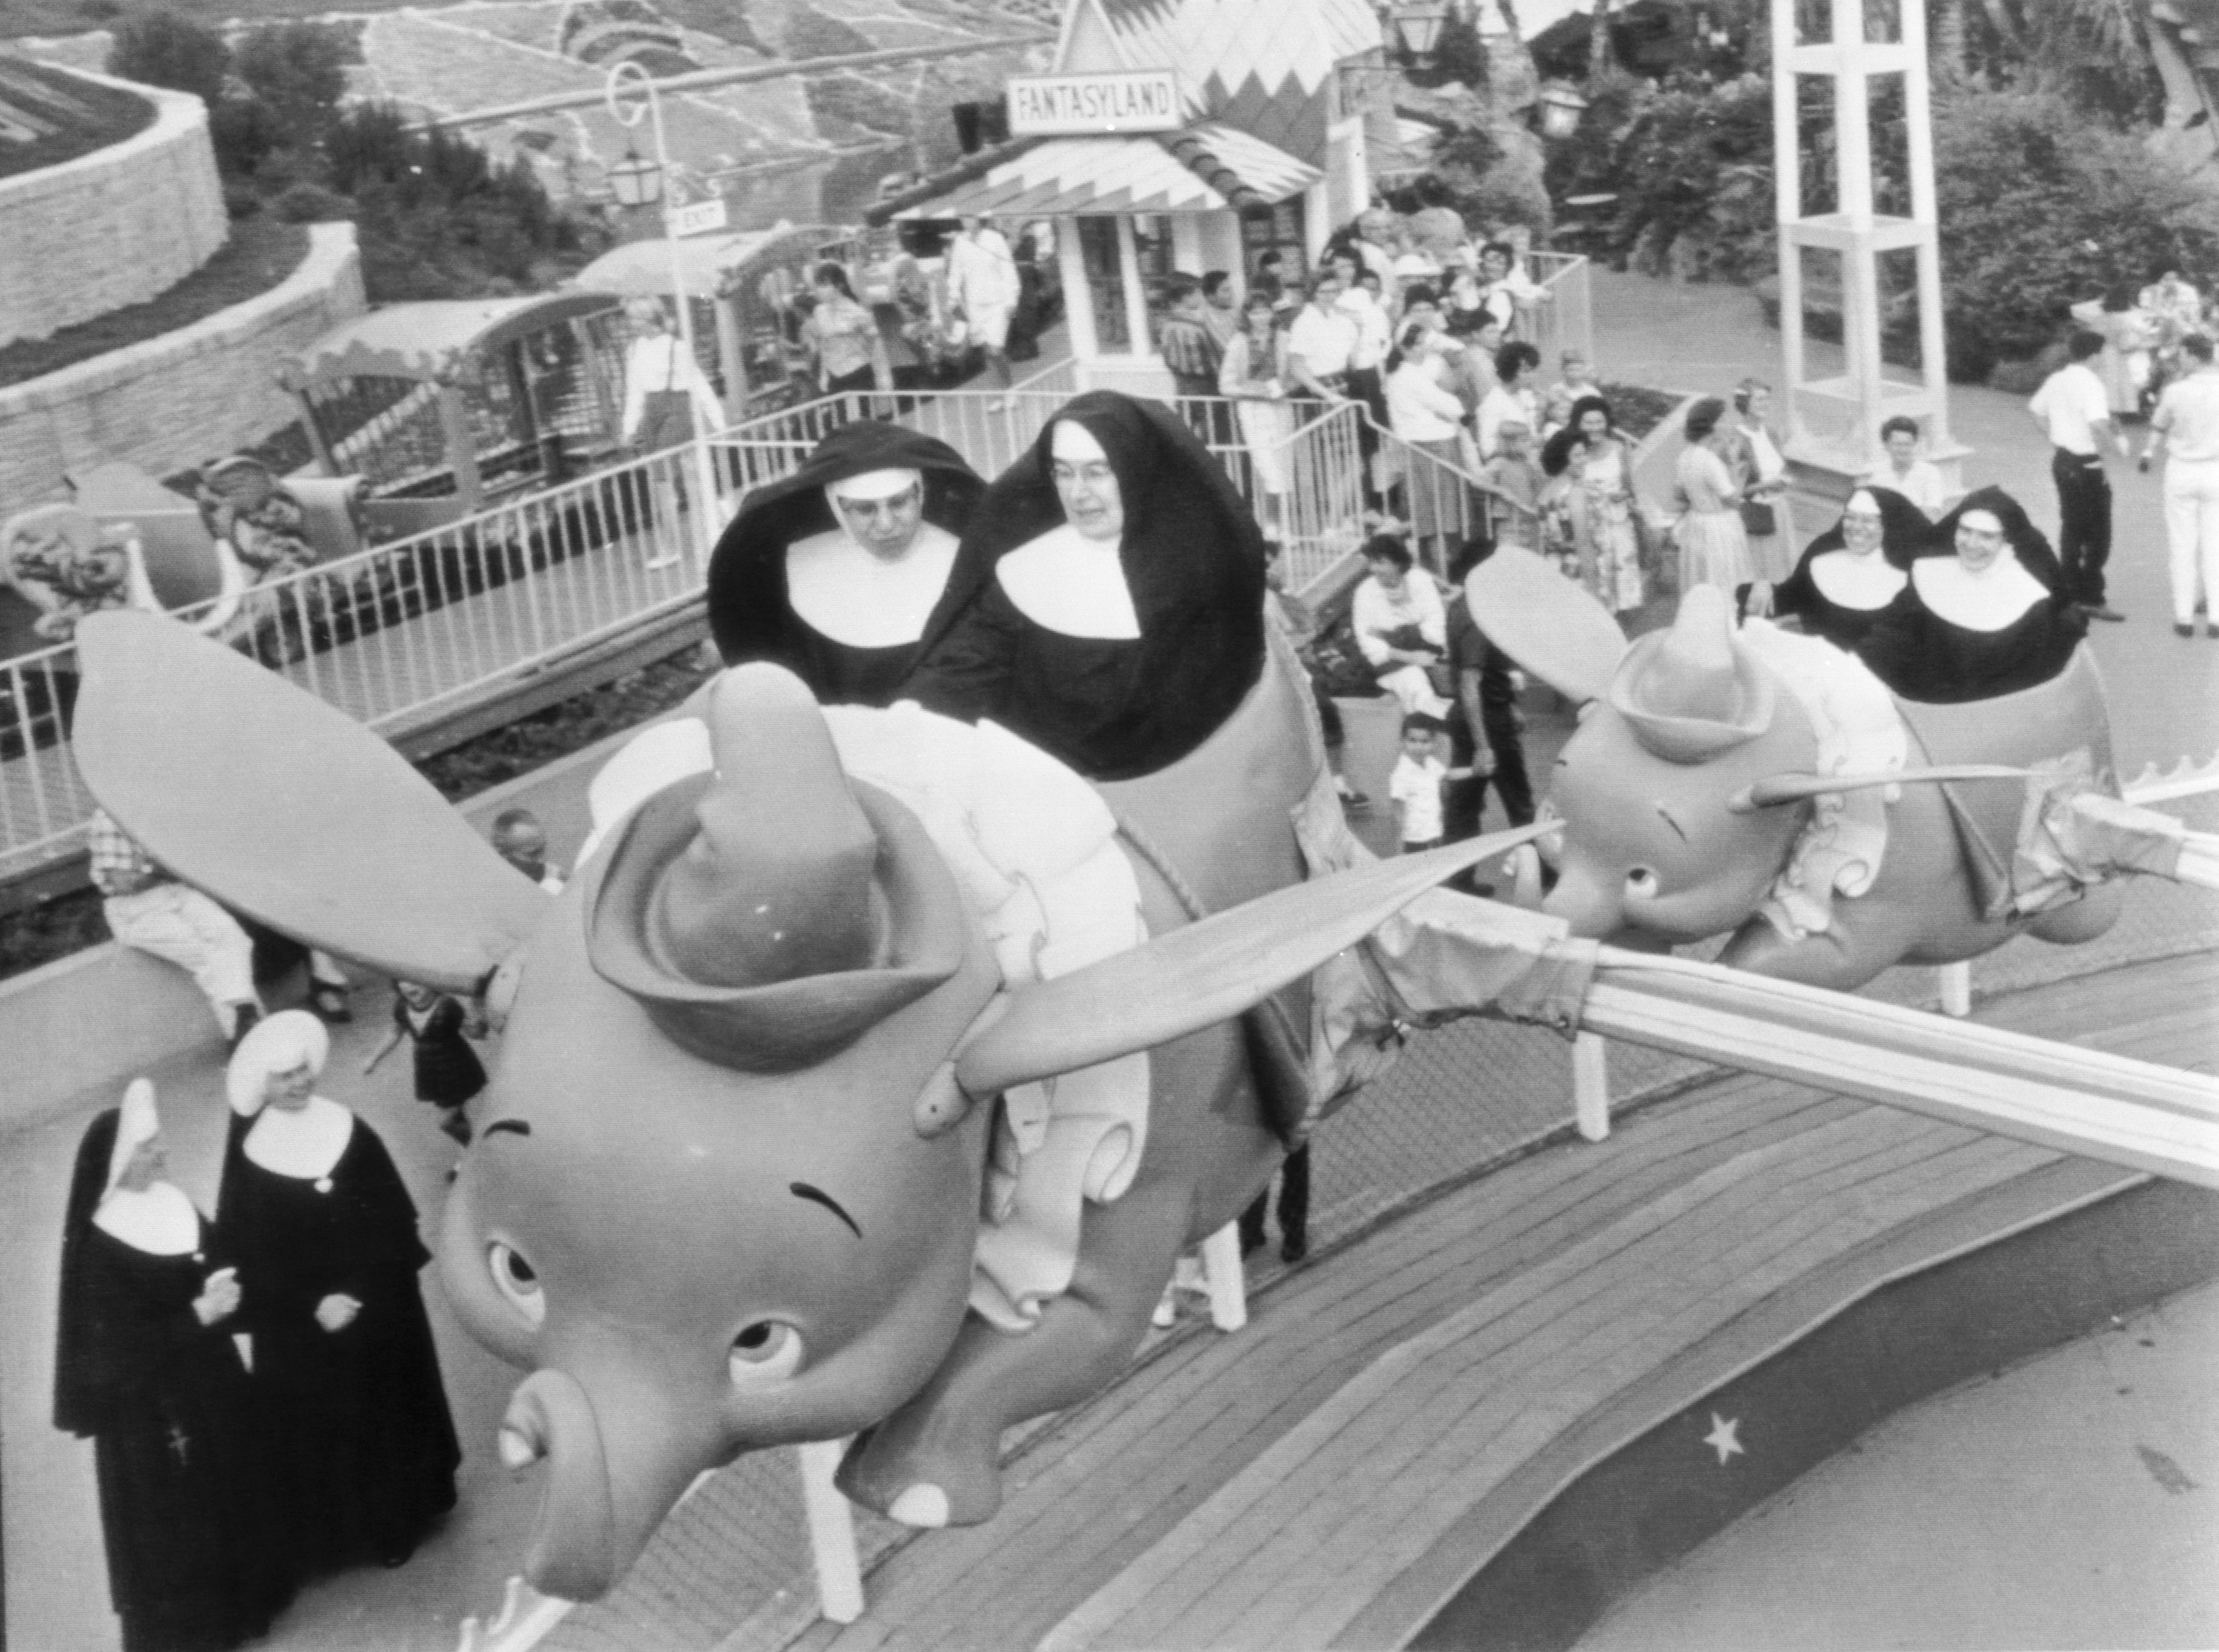 Slide 17 of 33: Catholic School Day at Disneyland and Sisters Mary William and Mary Alfred take the first elephant as Sisters Mary Yvonne and Mary Joachin follow close behind as they join the children in a ride on "Dumbo" the flying elephant at Disneyland.